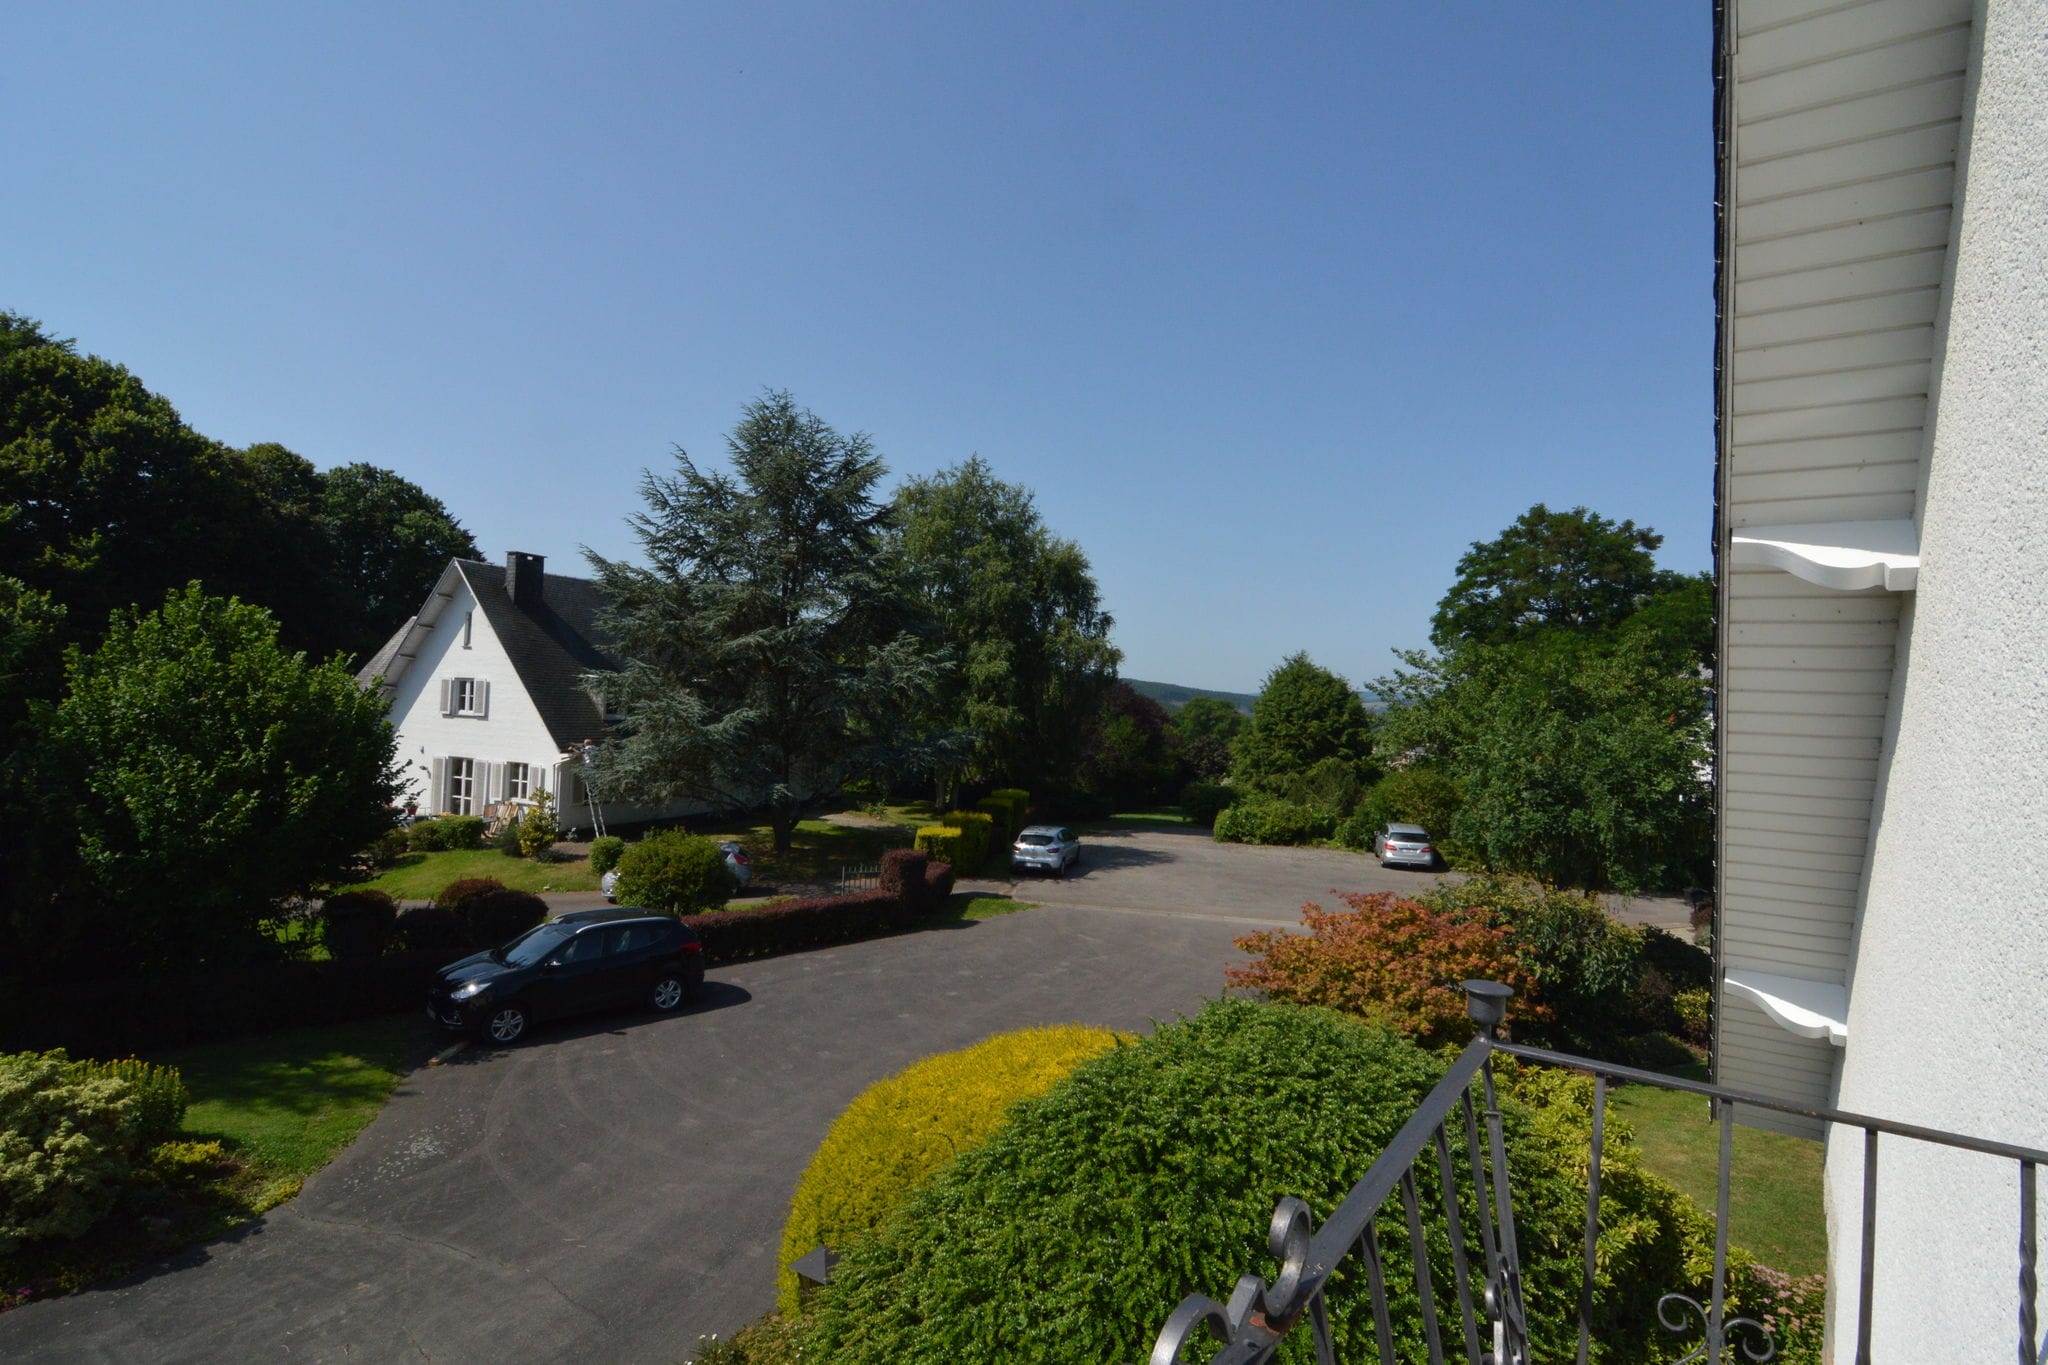 Elegant villa in Stavelot with fitness and playroom and an incredible garden!